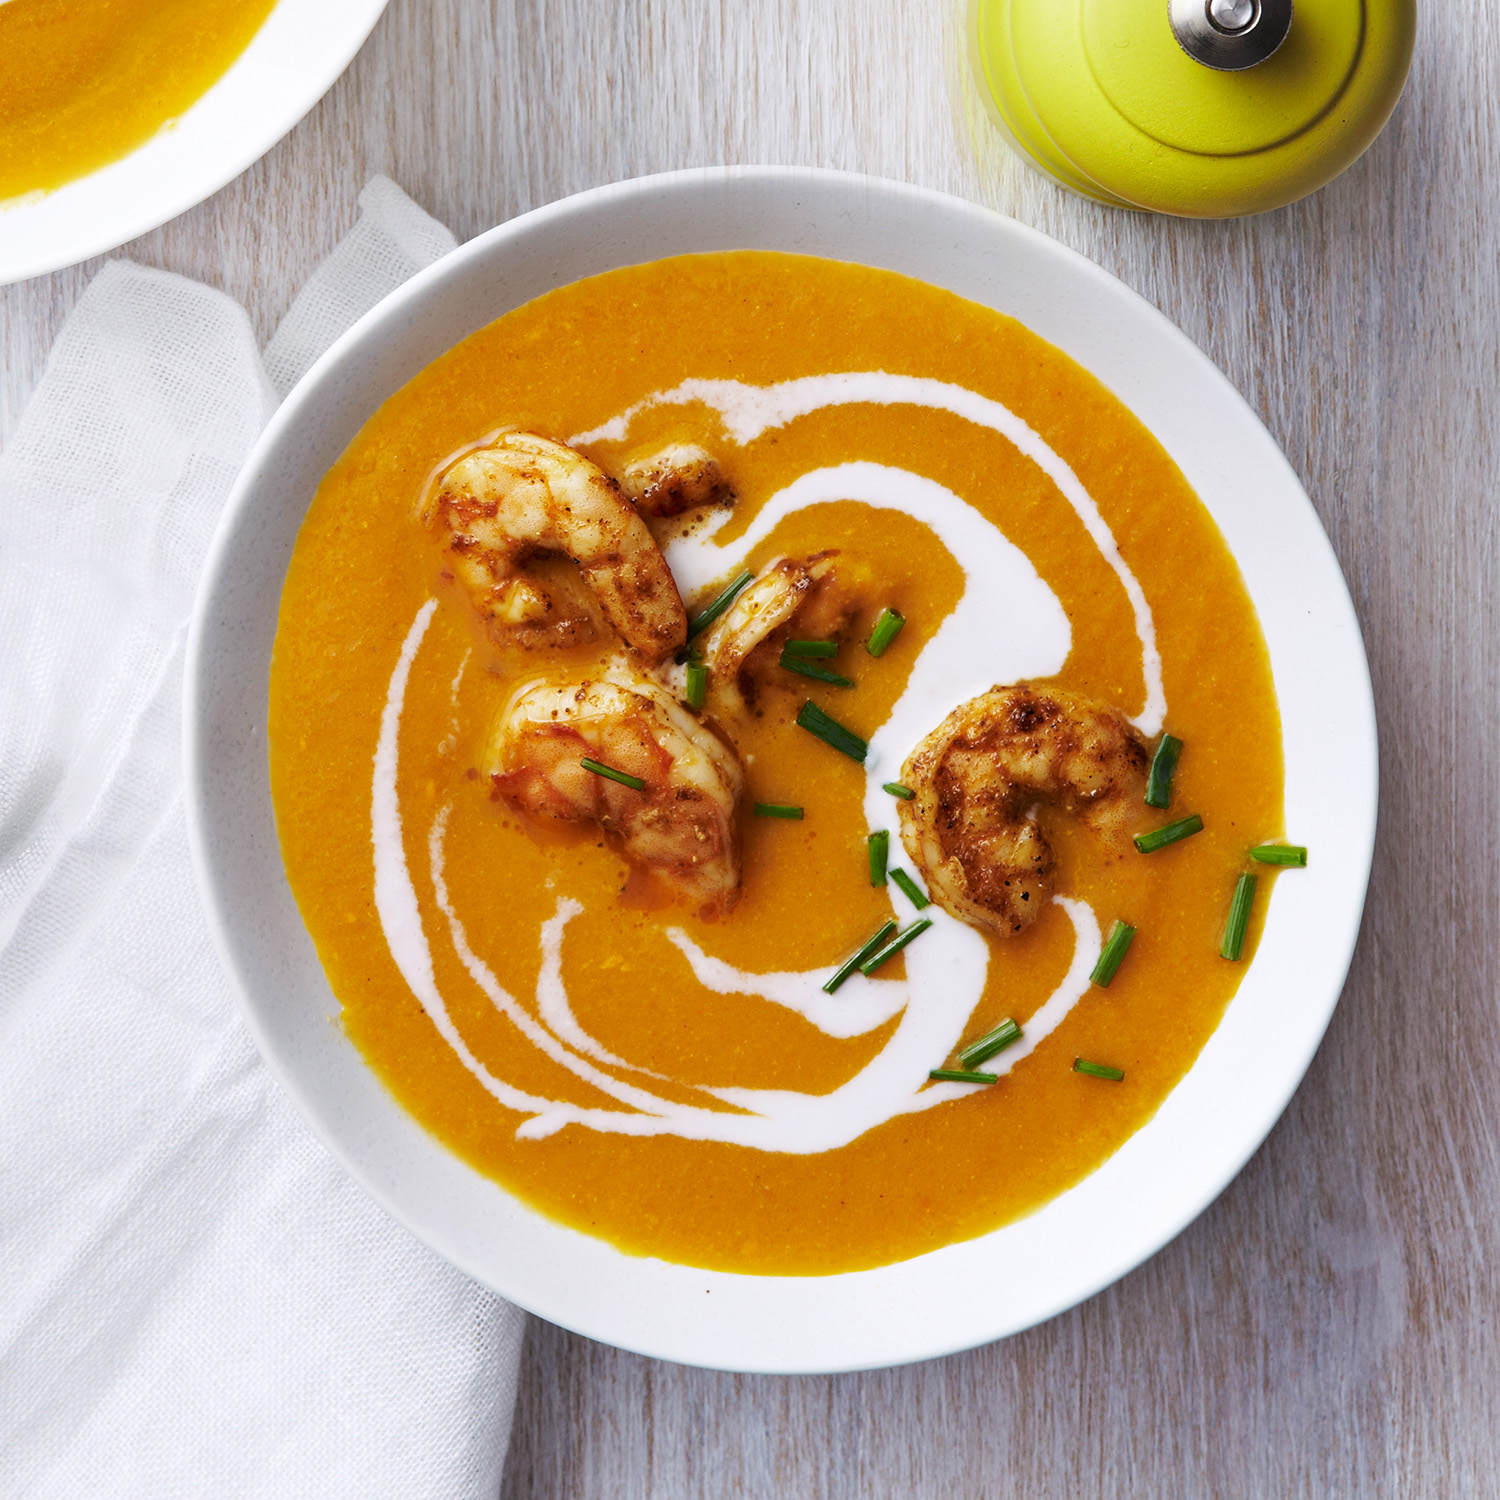 Carrot & Coconut Soup with Curried Shrimp